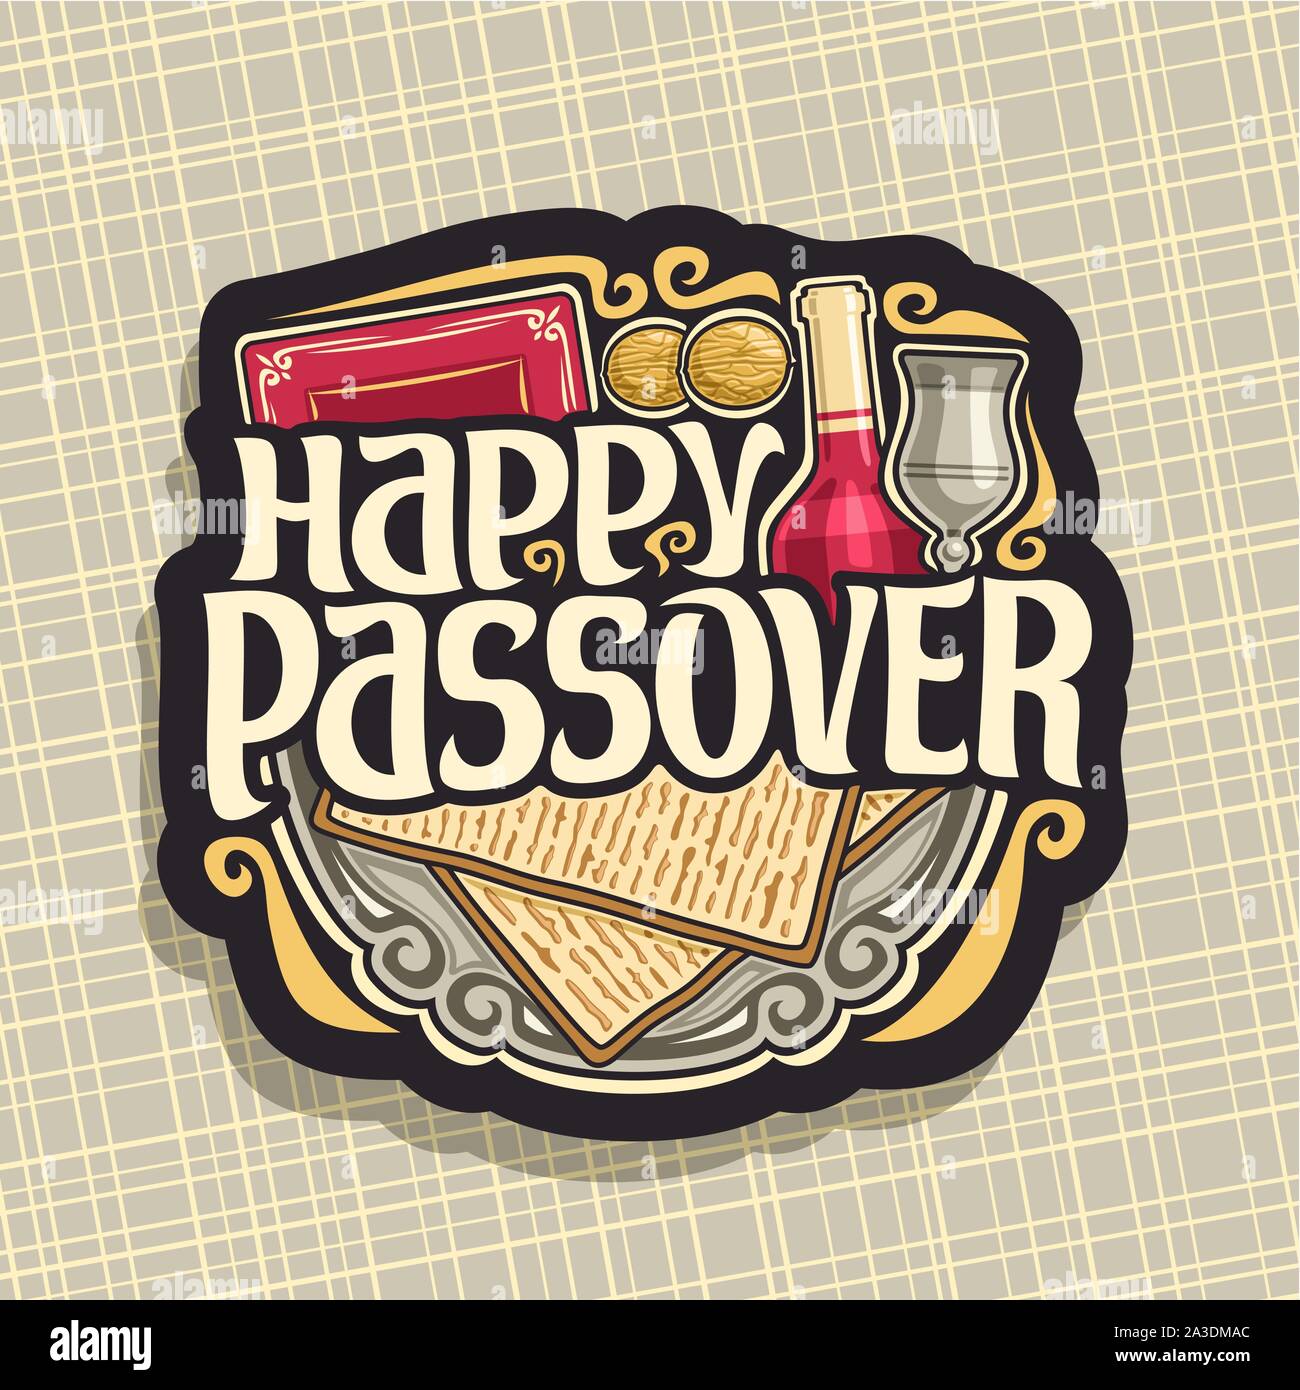 Vector logo for Passover holiday, decorative handwritten font for text happy passover, cut sign with religious book torah, kosher flatbread matzah, bo Stock Vector